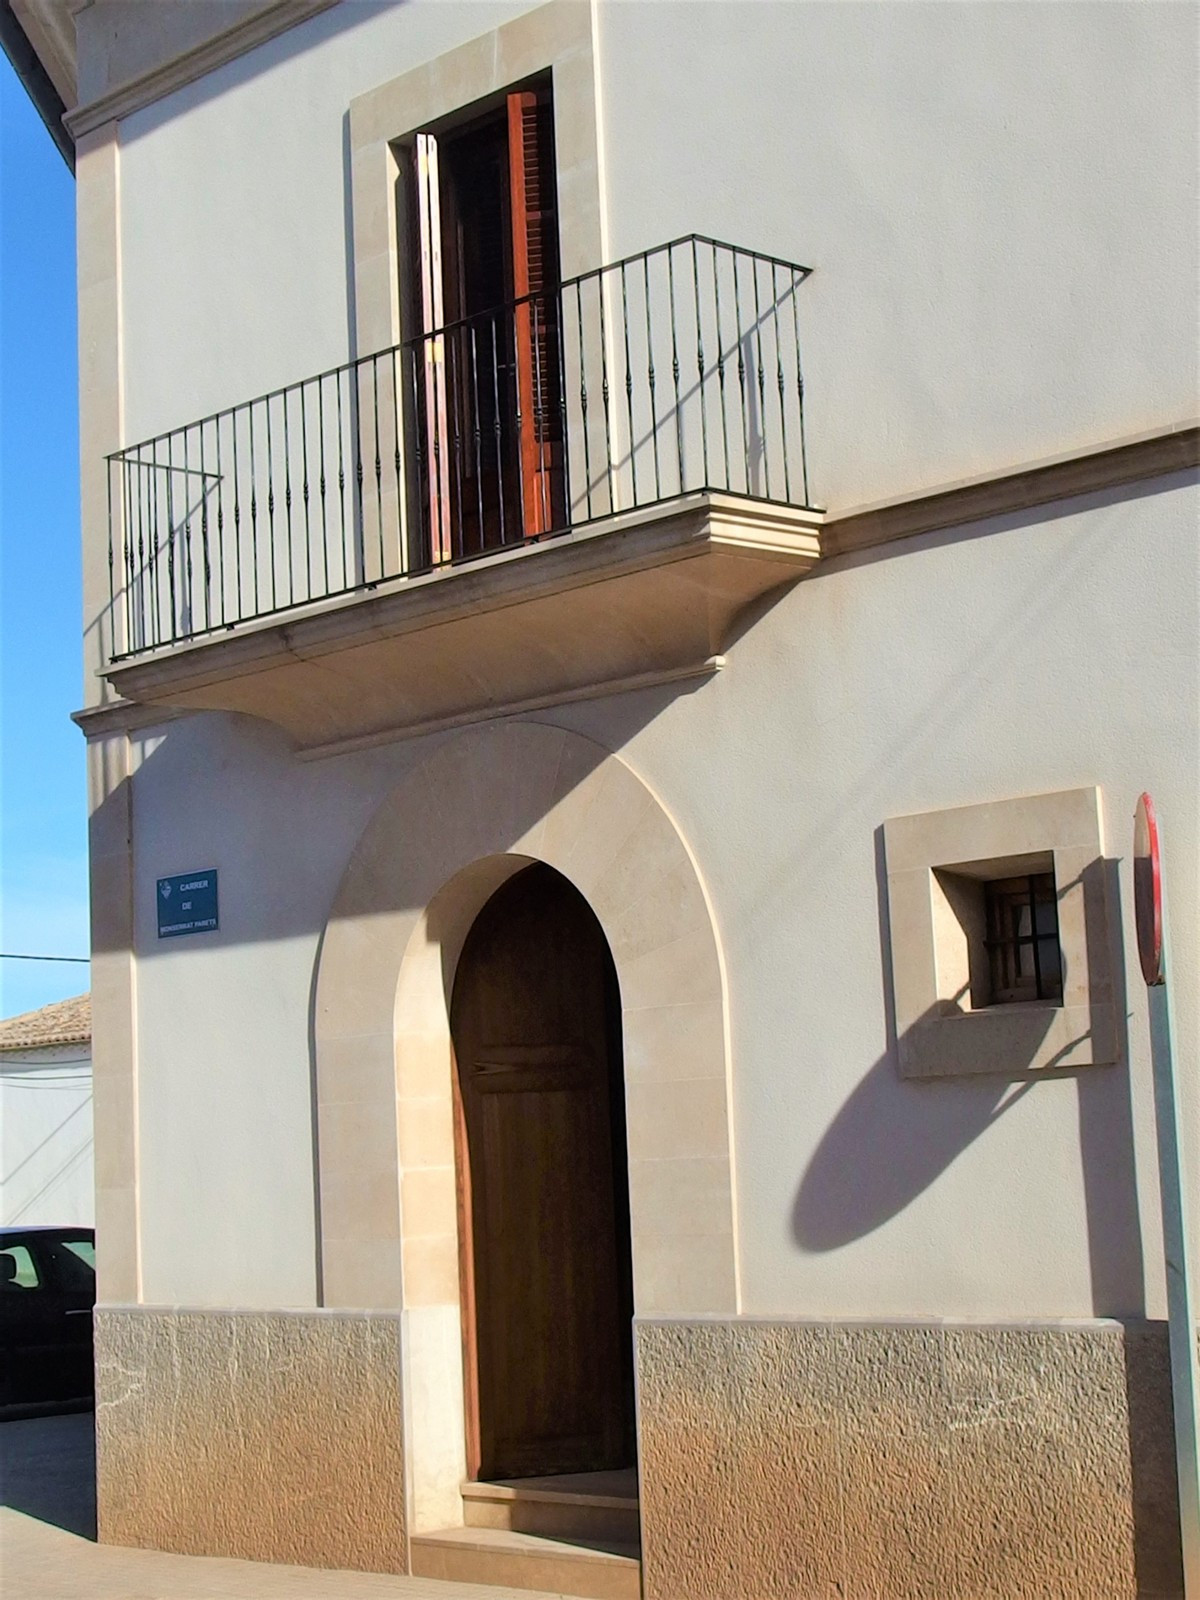 Qlistings - Lovely House in Llucmajor, Mallorca Property Image